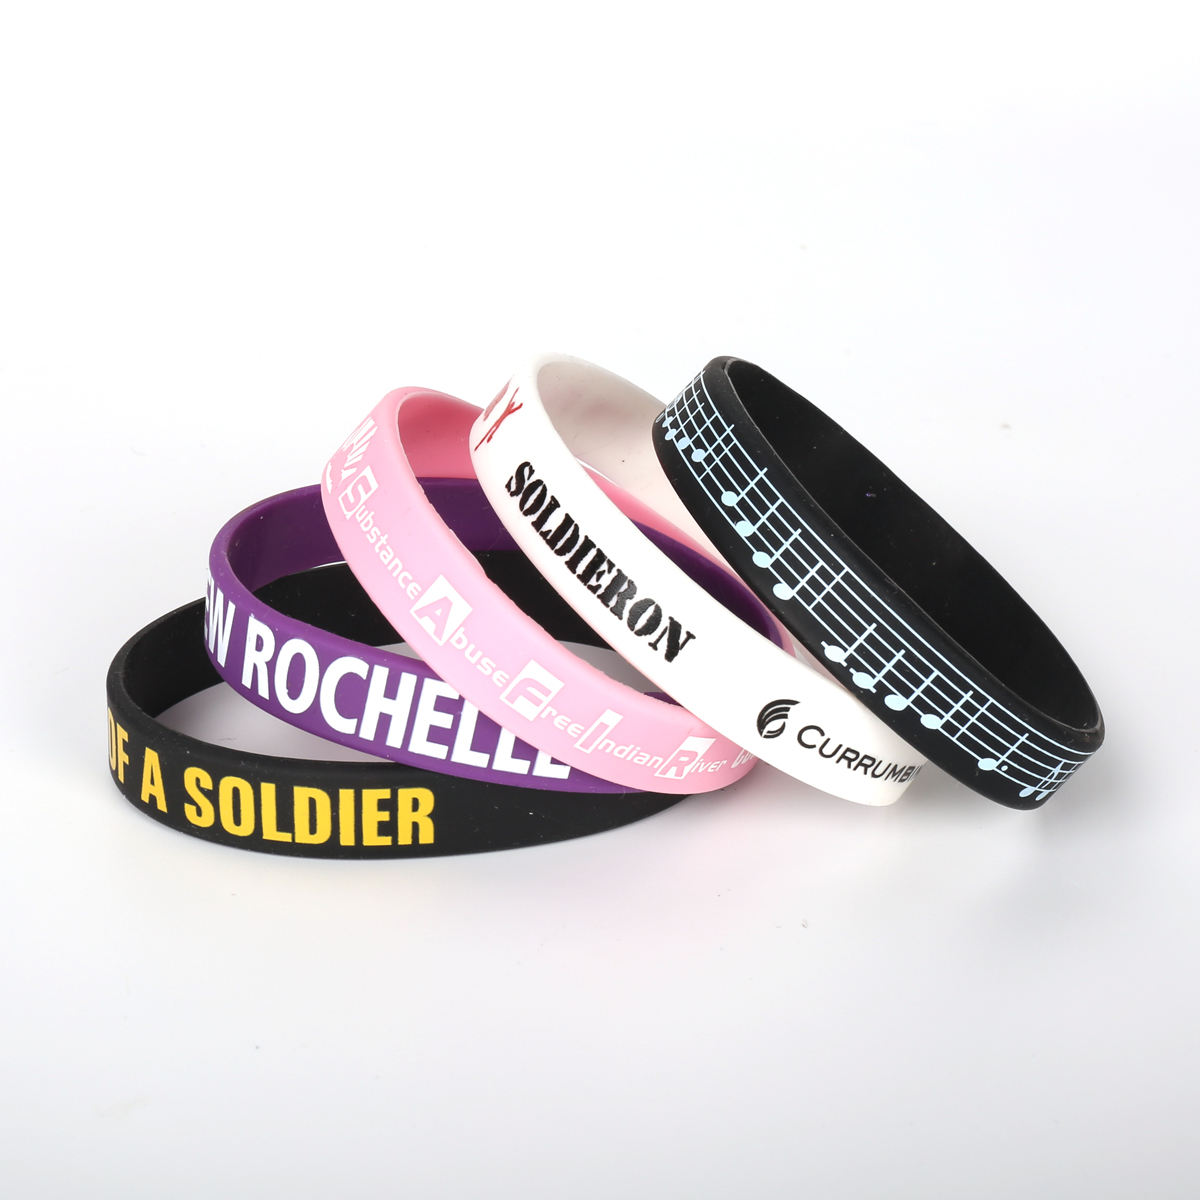 China Manufacturer Factory Price Personalized Souvenir Wrist Band Silicone New Custom Debossed Sport Wristband